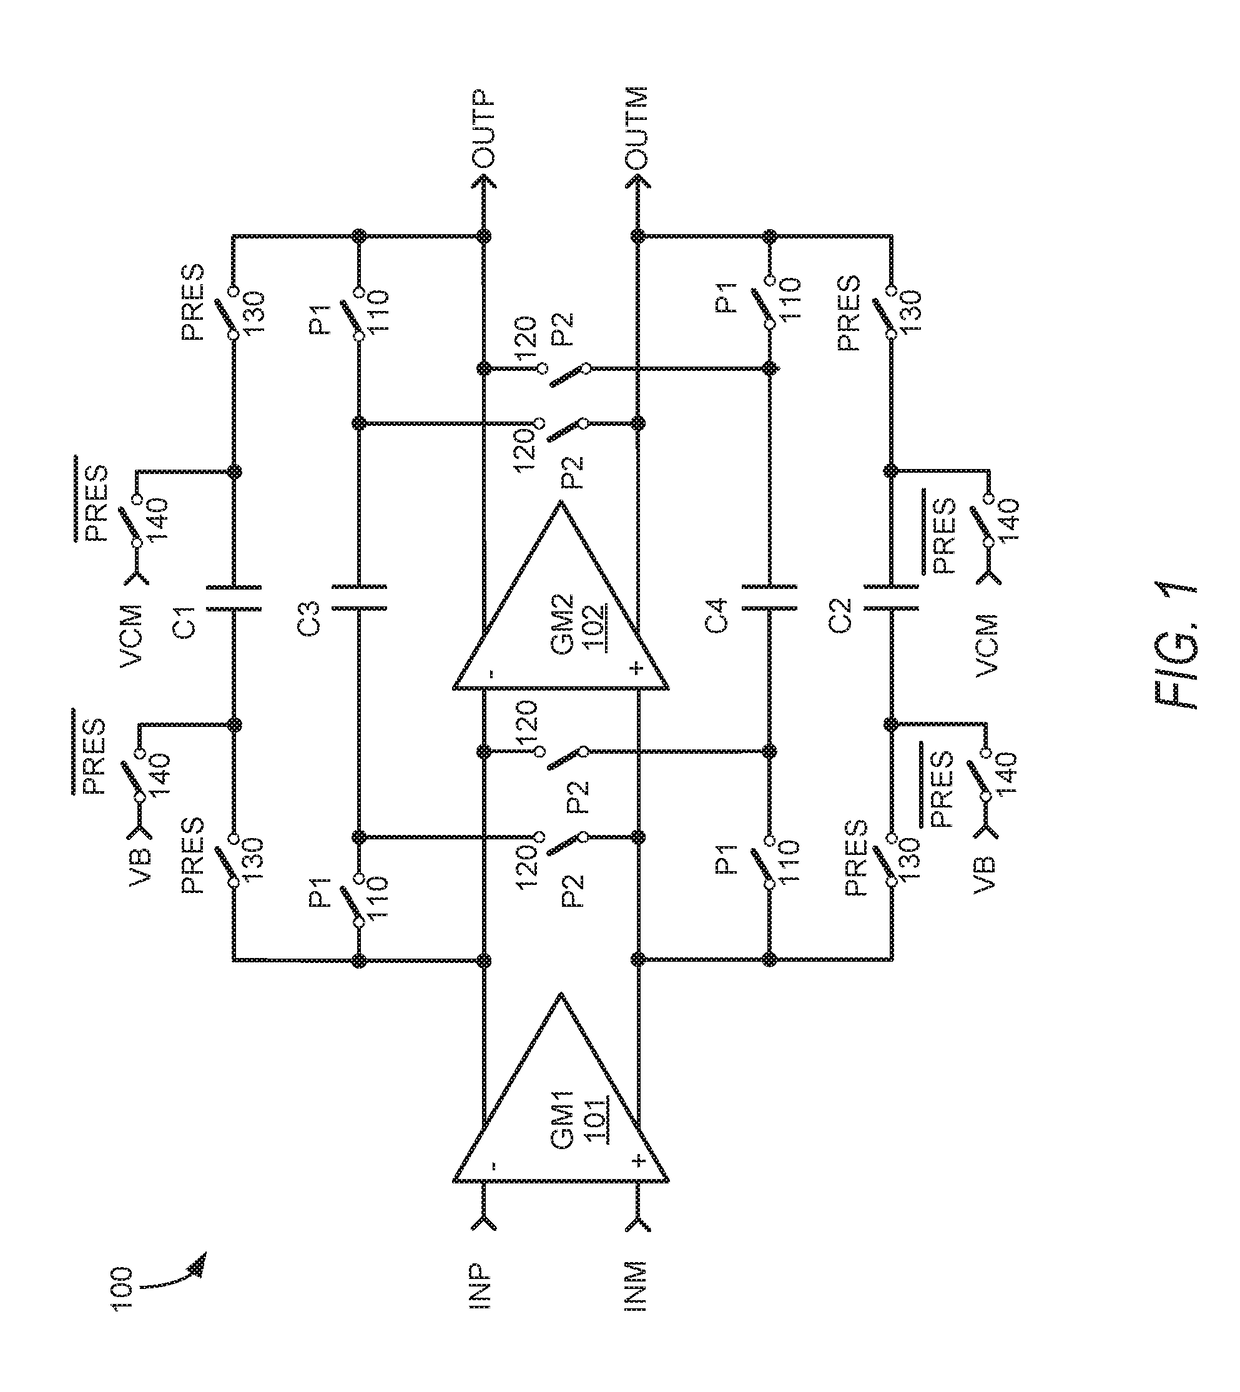 Fast settling capacitive gain amplifier circuit